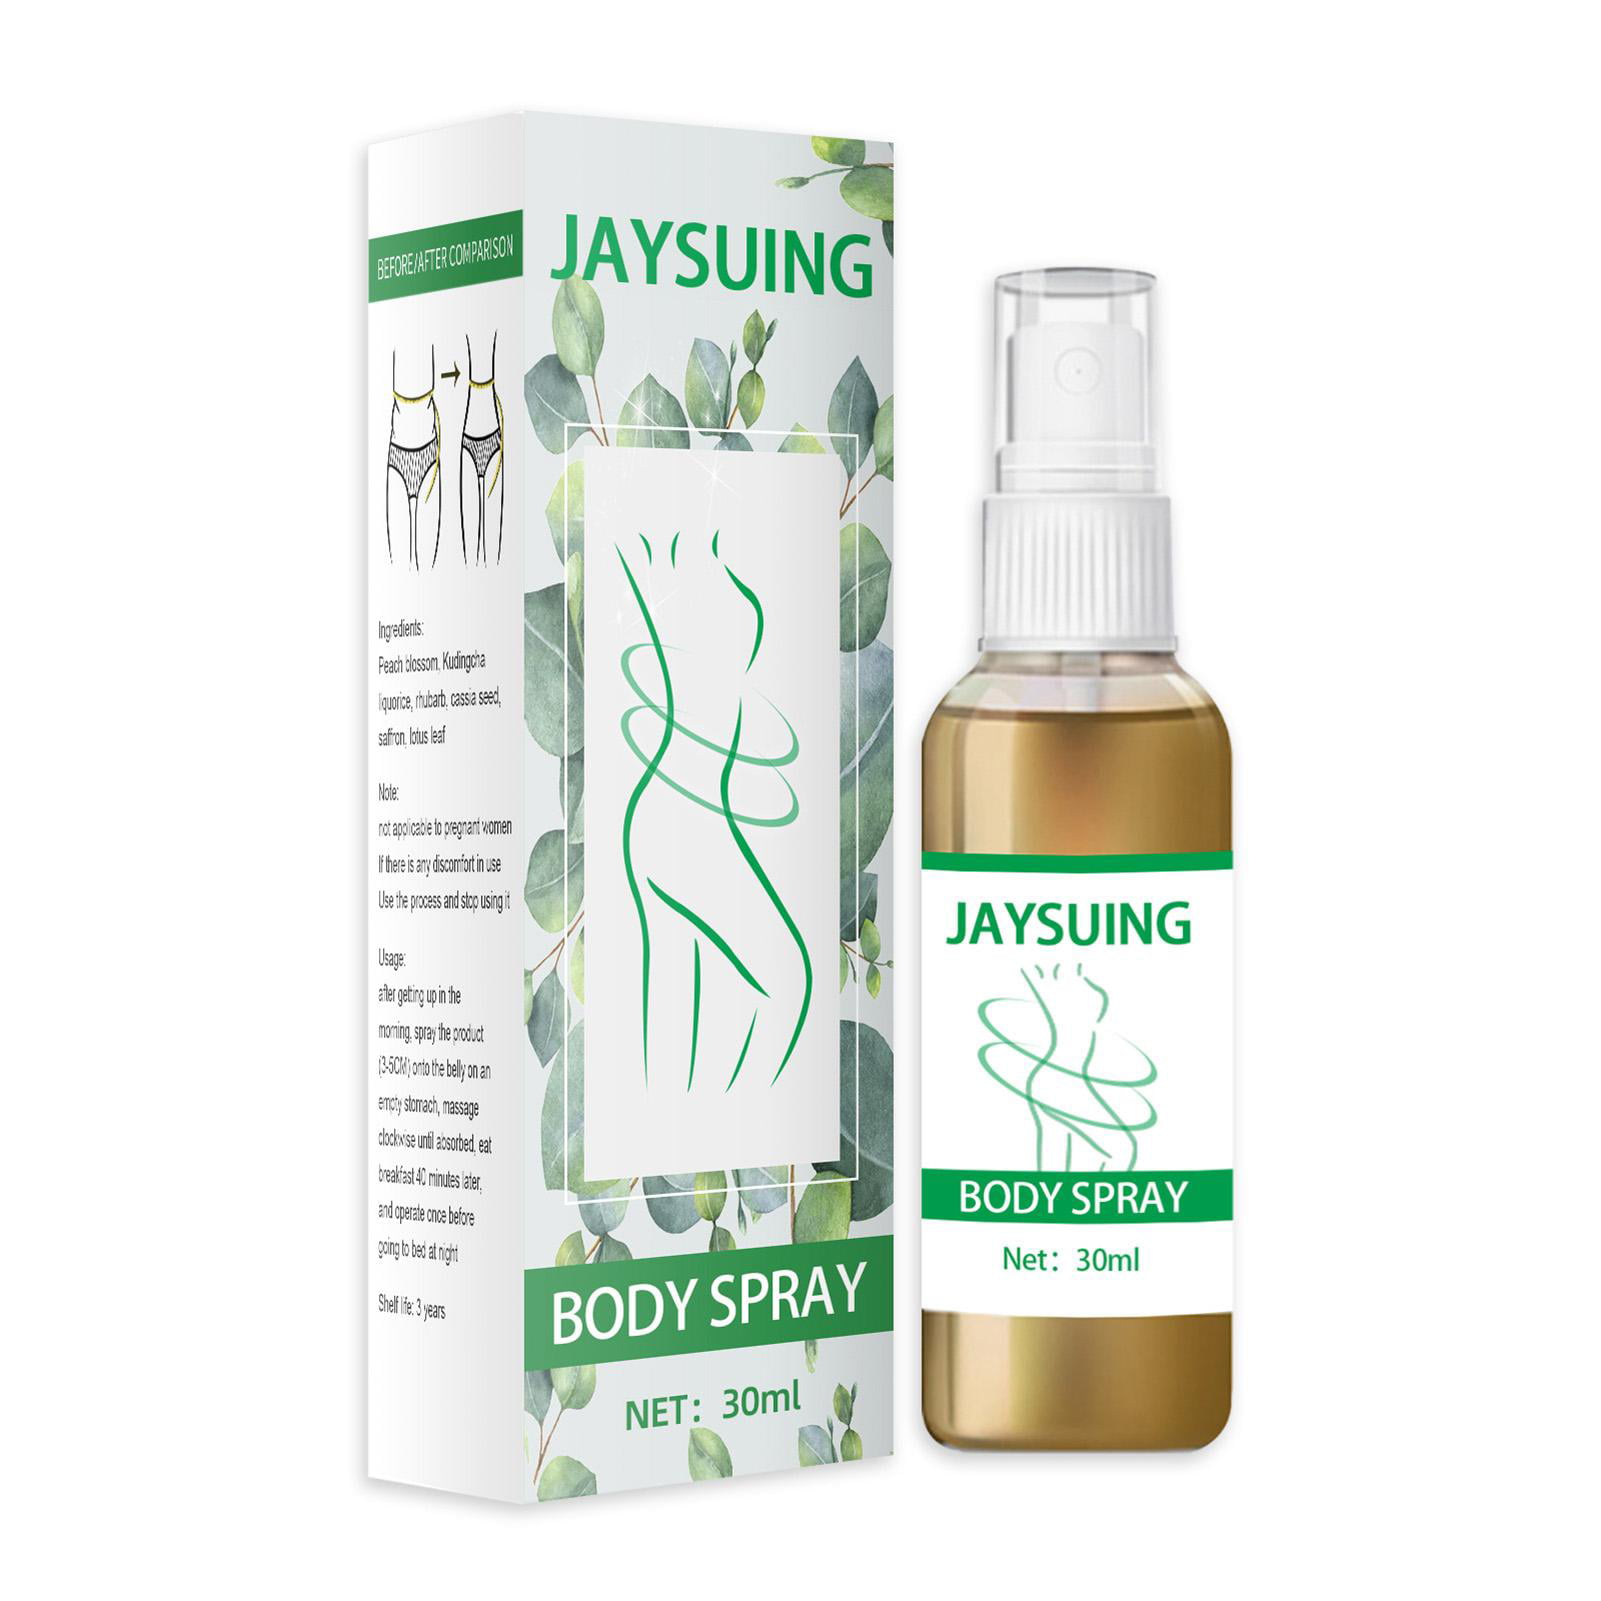 Gynecomastia Melting Sprays-Anti Cellulite Sprays-Cellulite-Free Slimming  Sprays-Losing Weight Body Slimming Sprays-Chest Belly Fat Remove For Men  And Women - Walmart.com